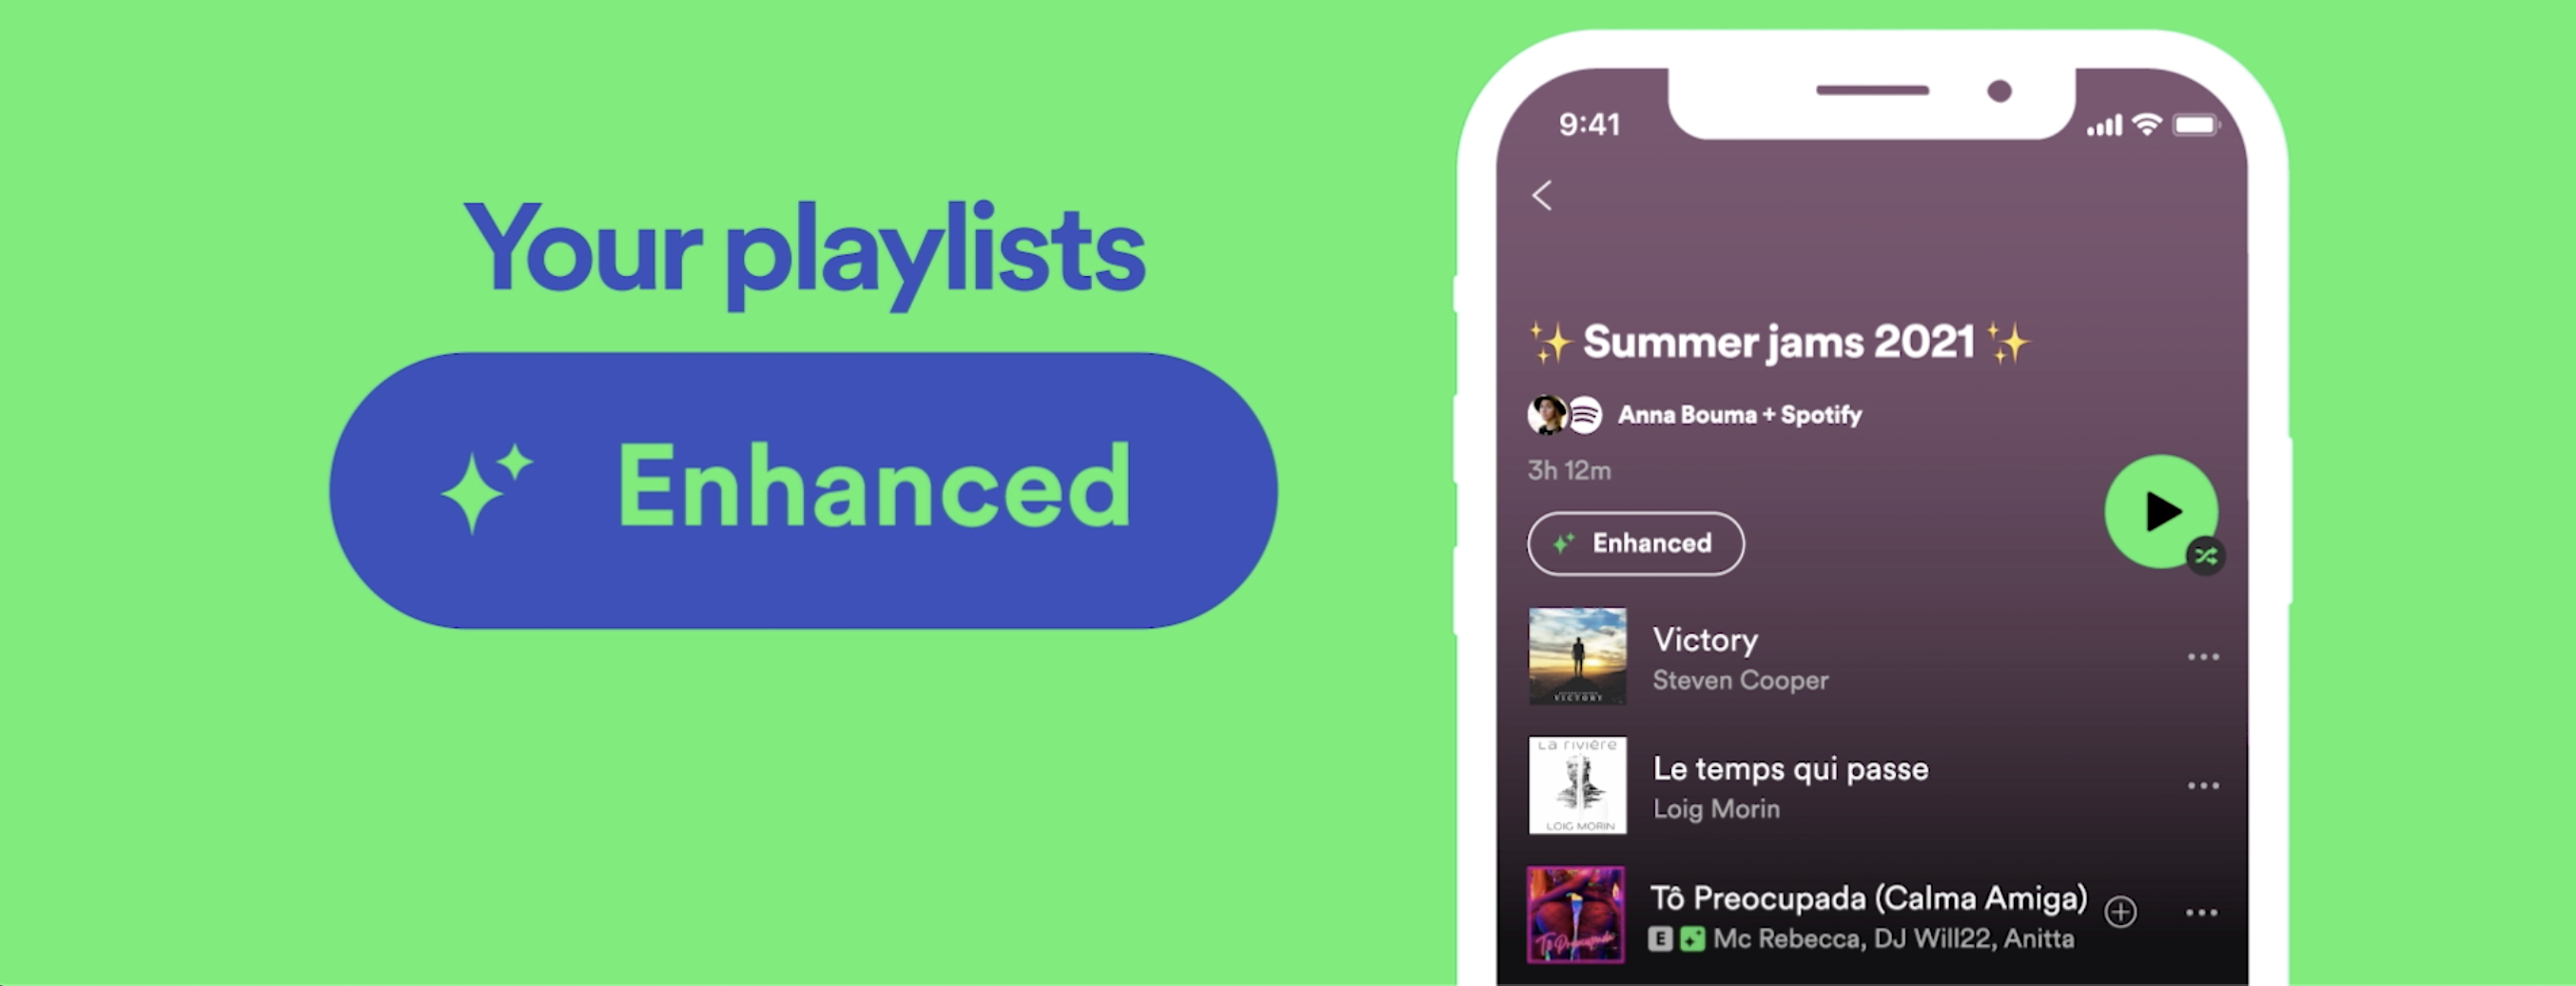 Spotify personalized song recommendations - personalized content